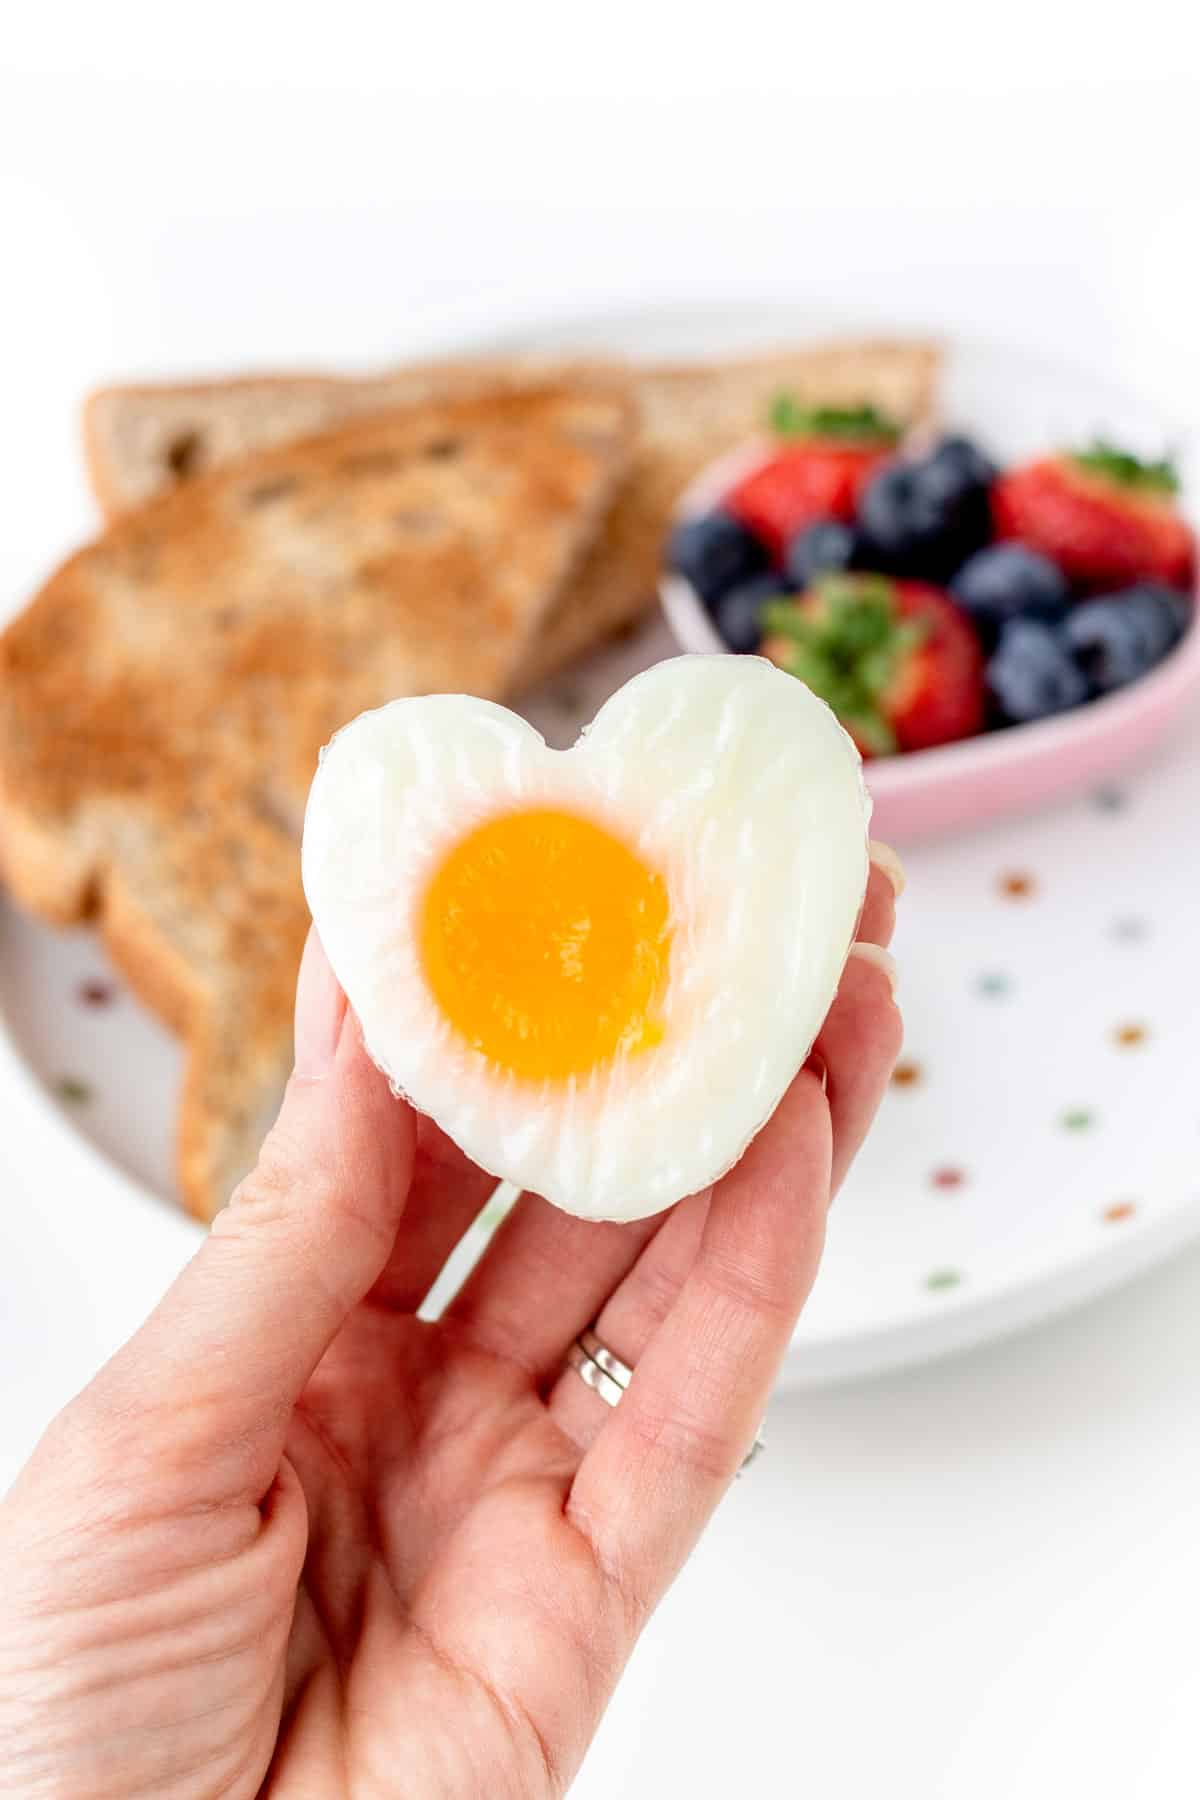 A close-up of a heart shaped egg in someone's hand with a plate of toast and berries in the background.